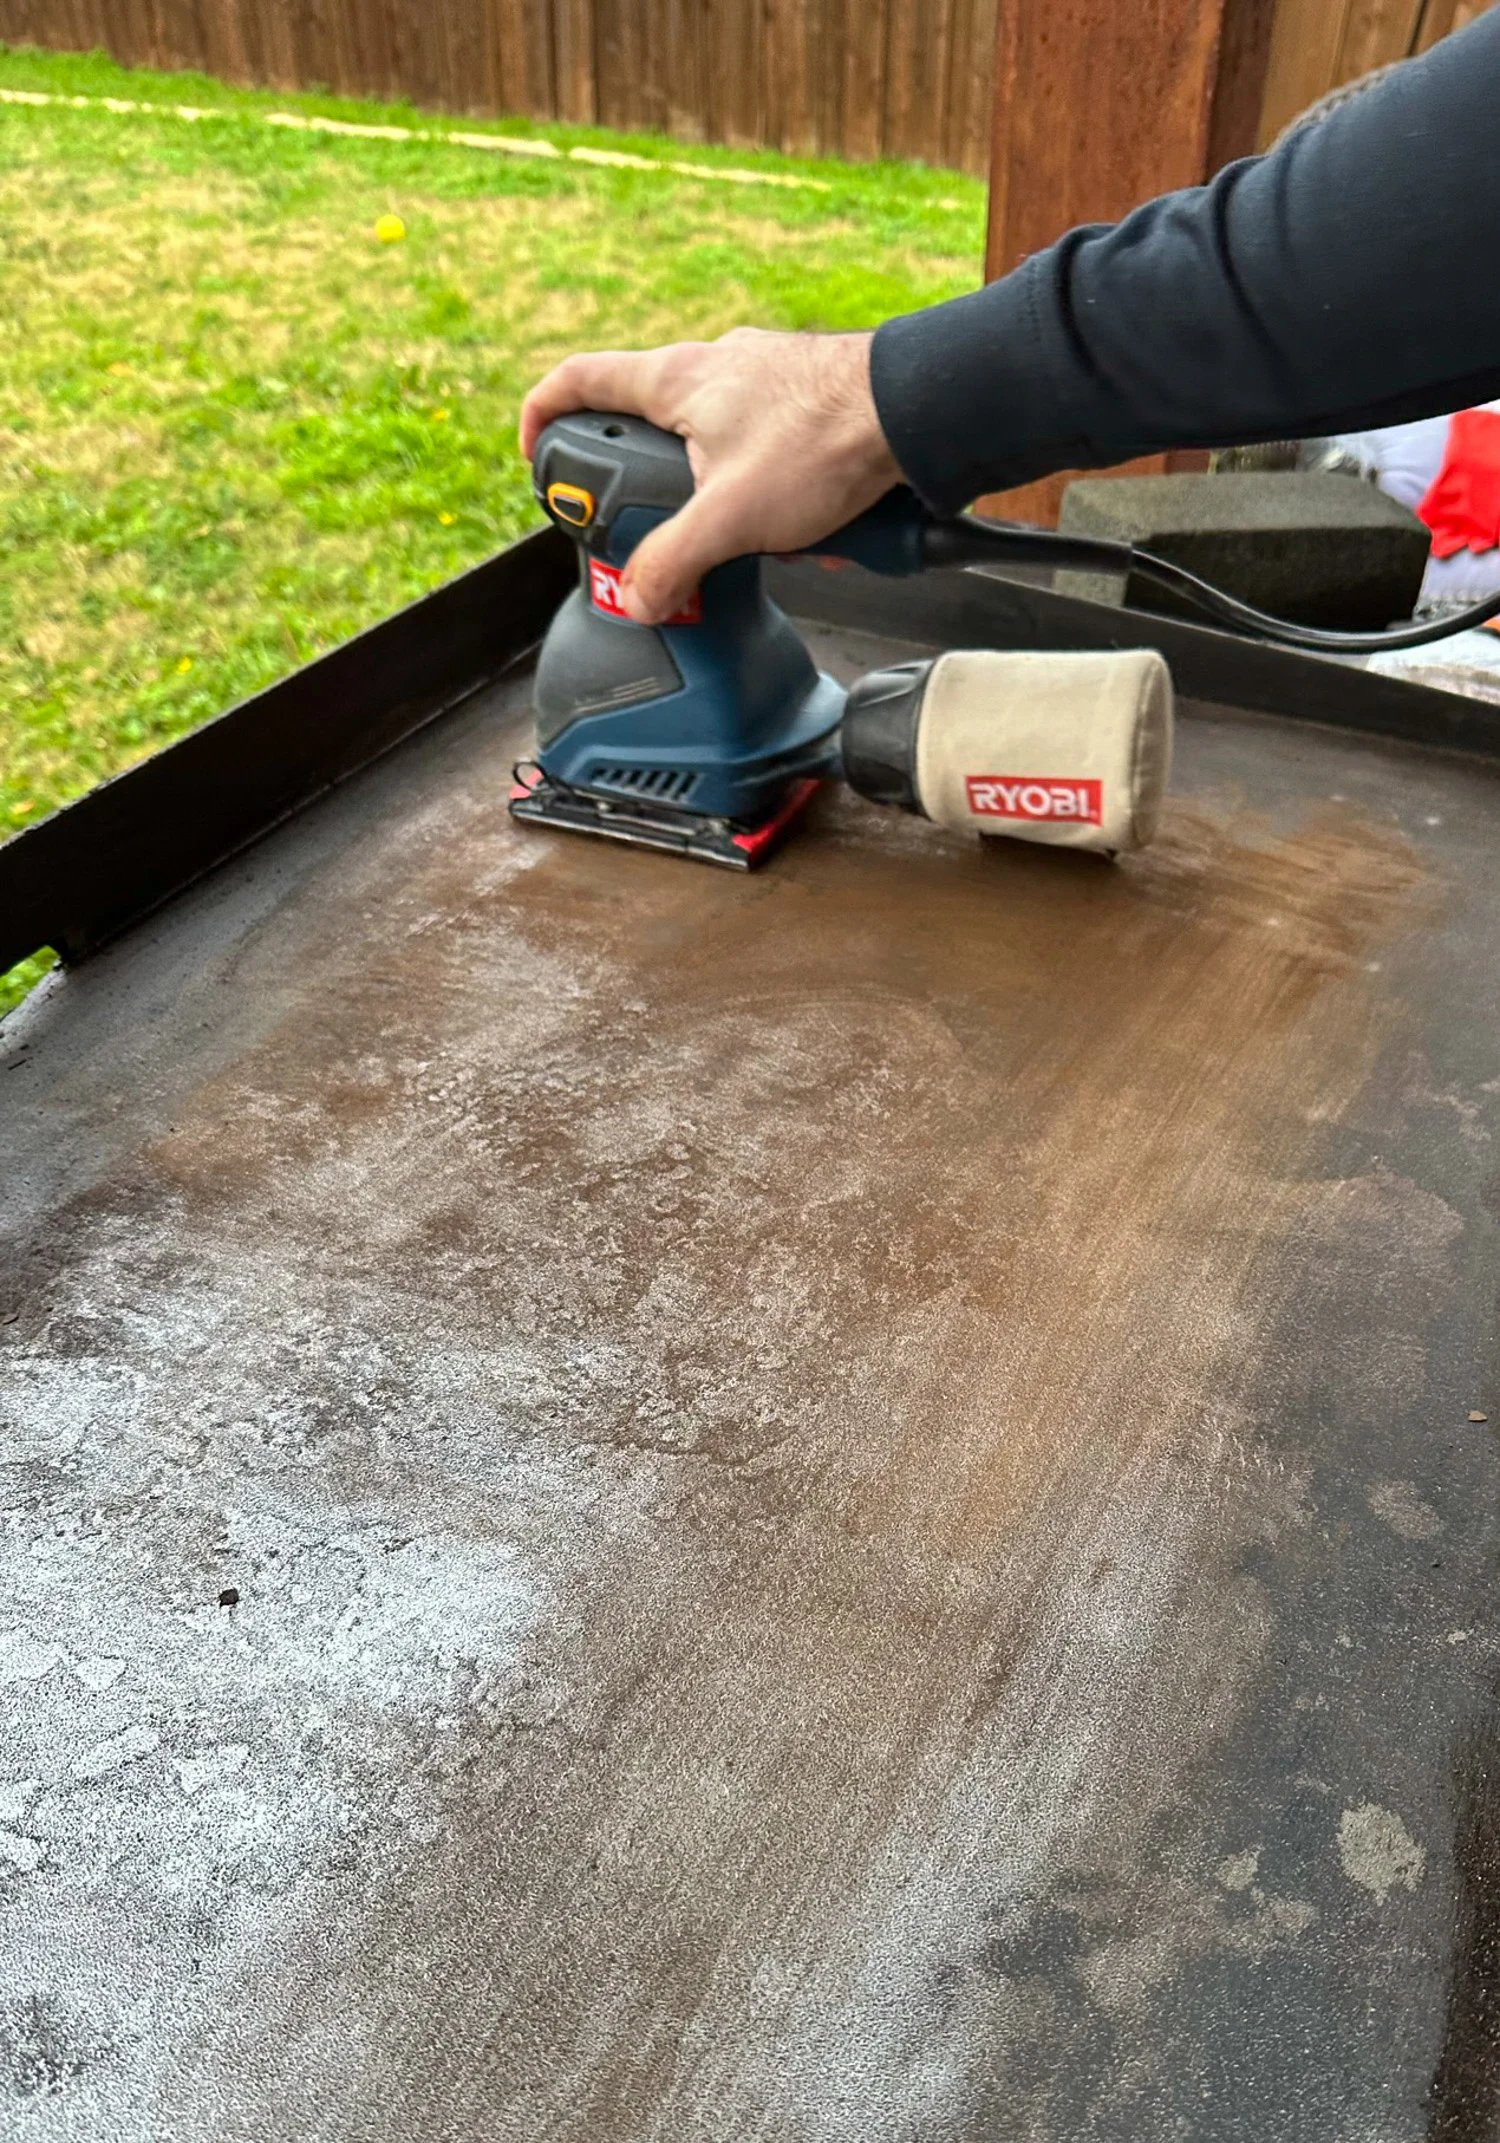 Sanding a griddle with a household sander to remove rust and debri.